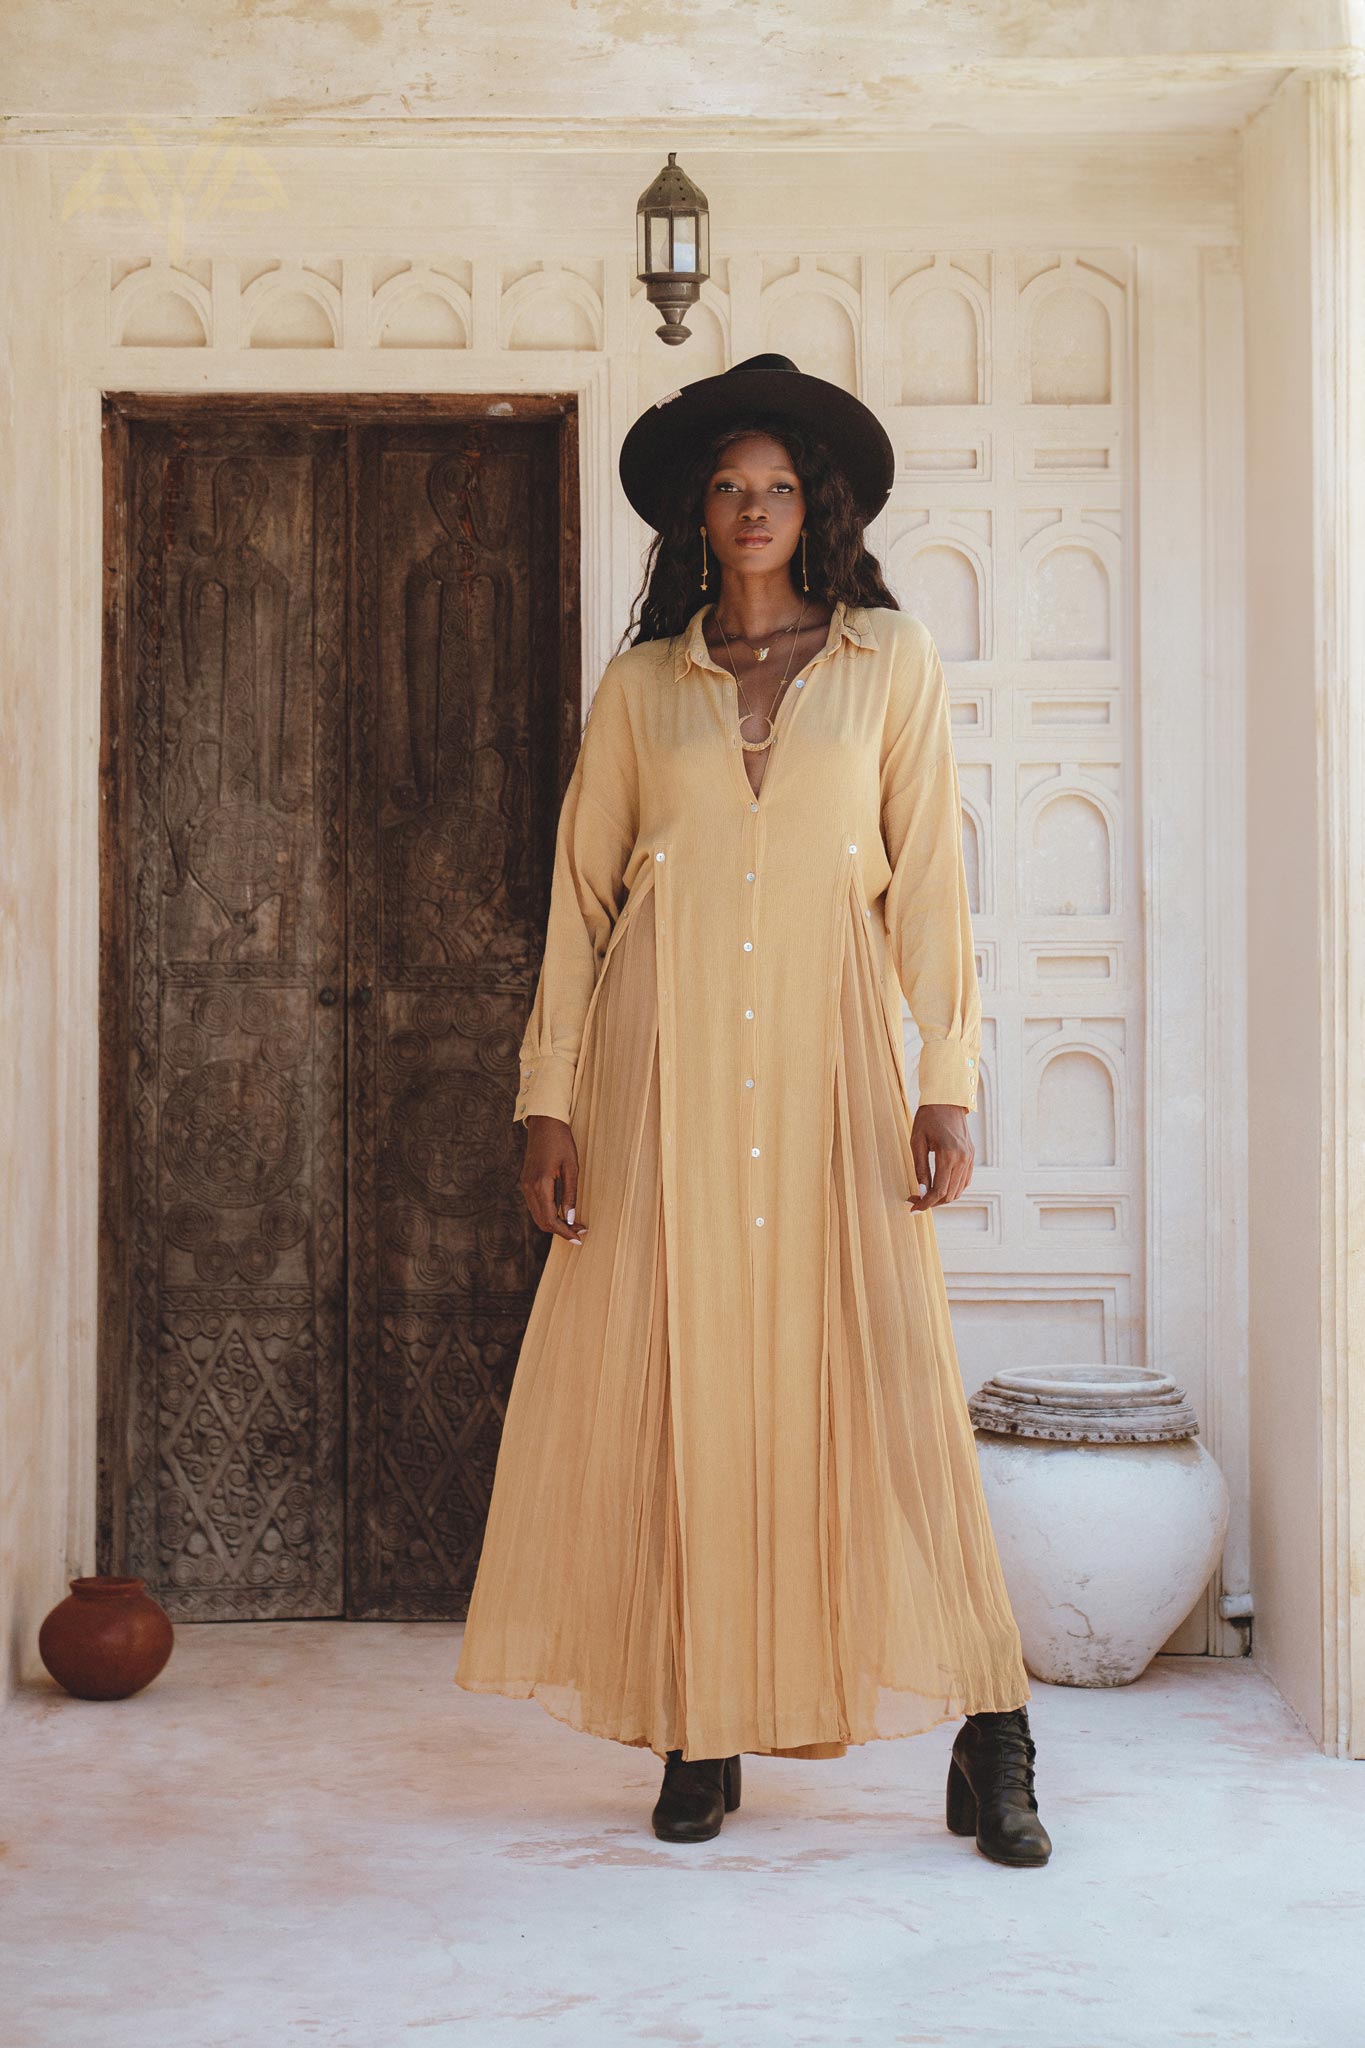 Be bold in this Ochre Boho Shirt Dress by Aya Sacred Wear